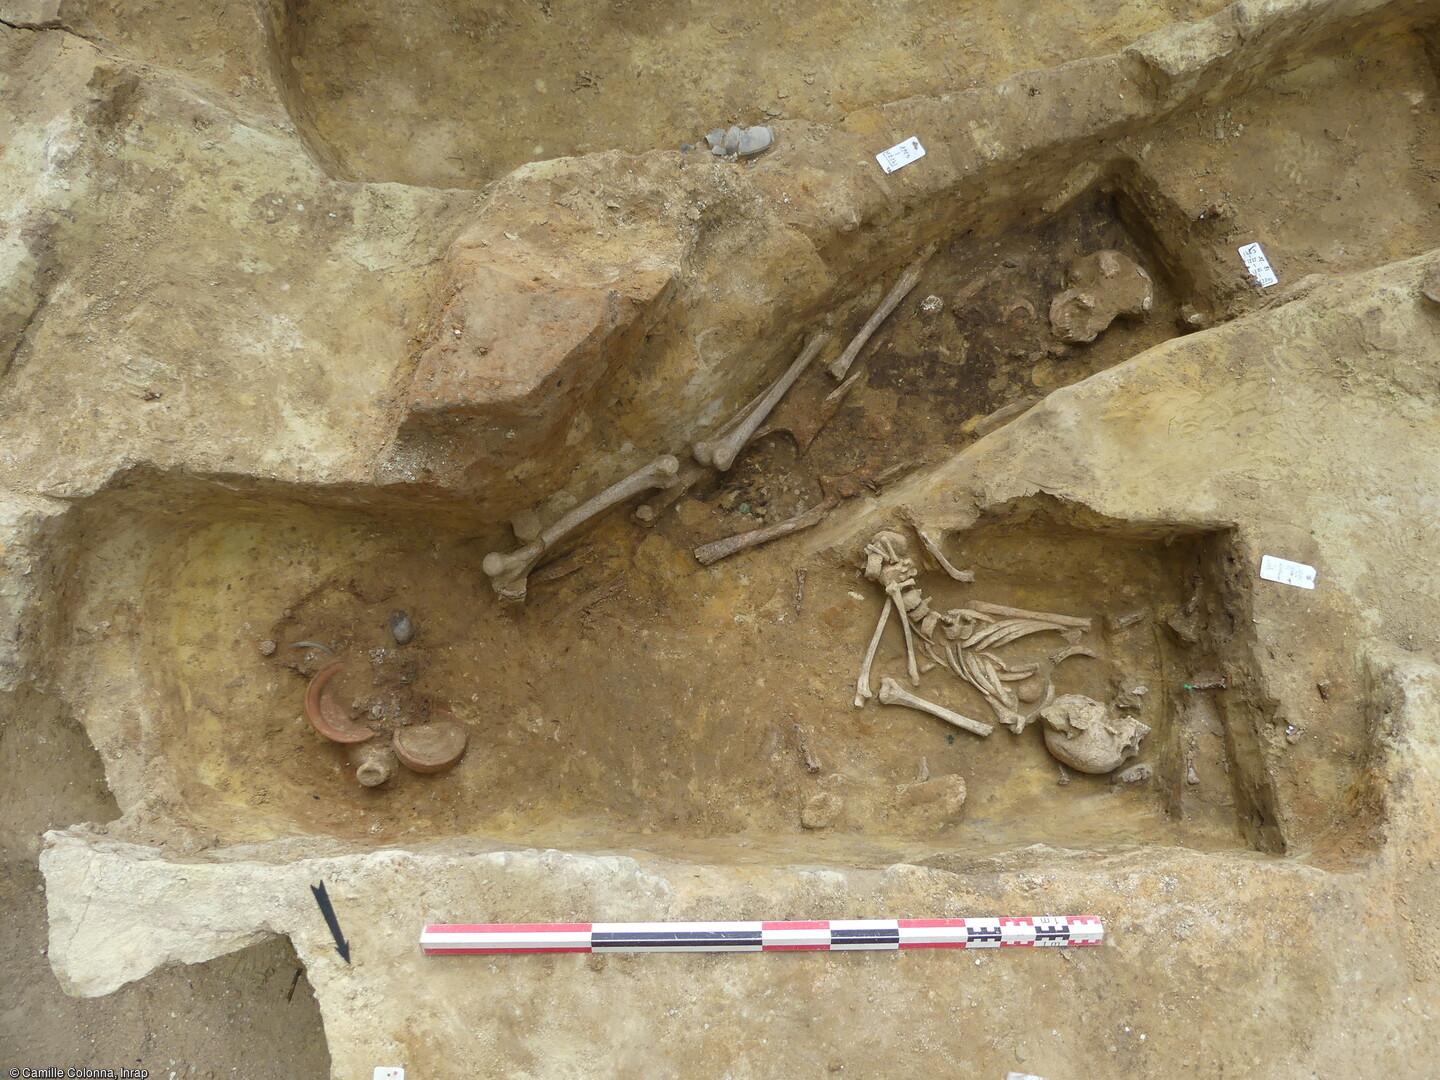 Two skeletons buried at different depths.